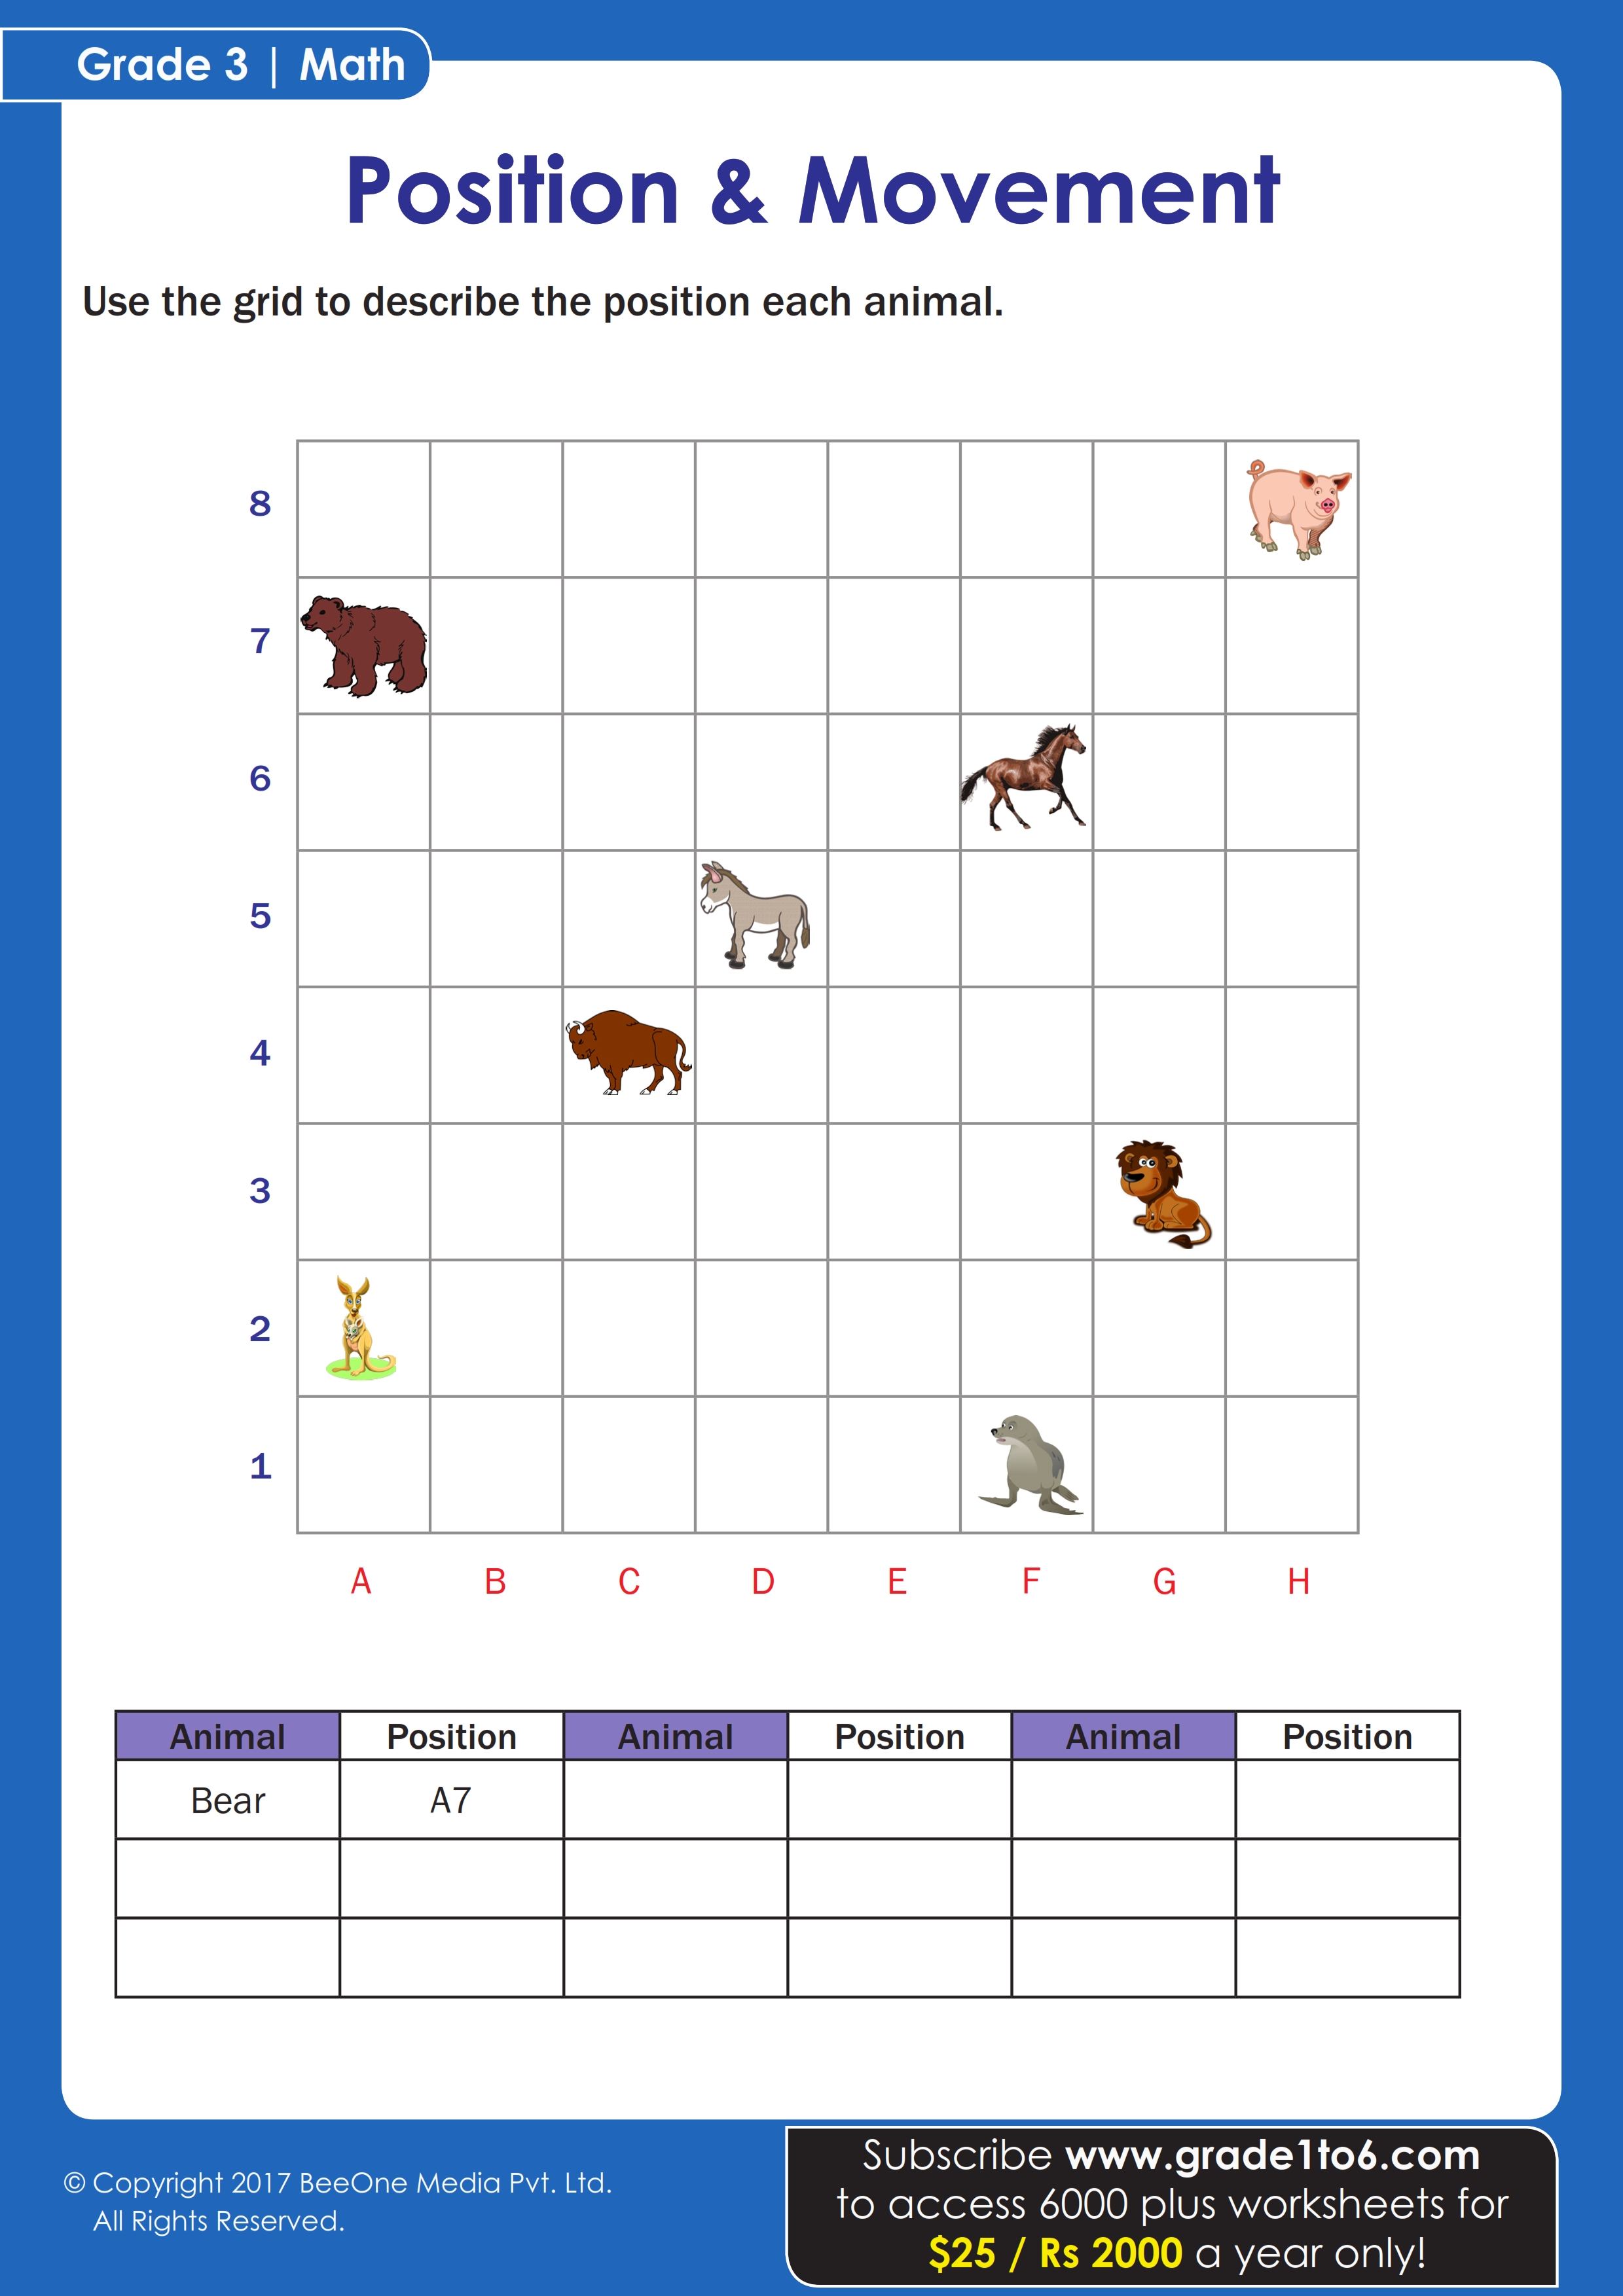 animals-can-english-activities-for-kids-english-lessons-for-kids-learning-english-for-kids